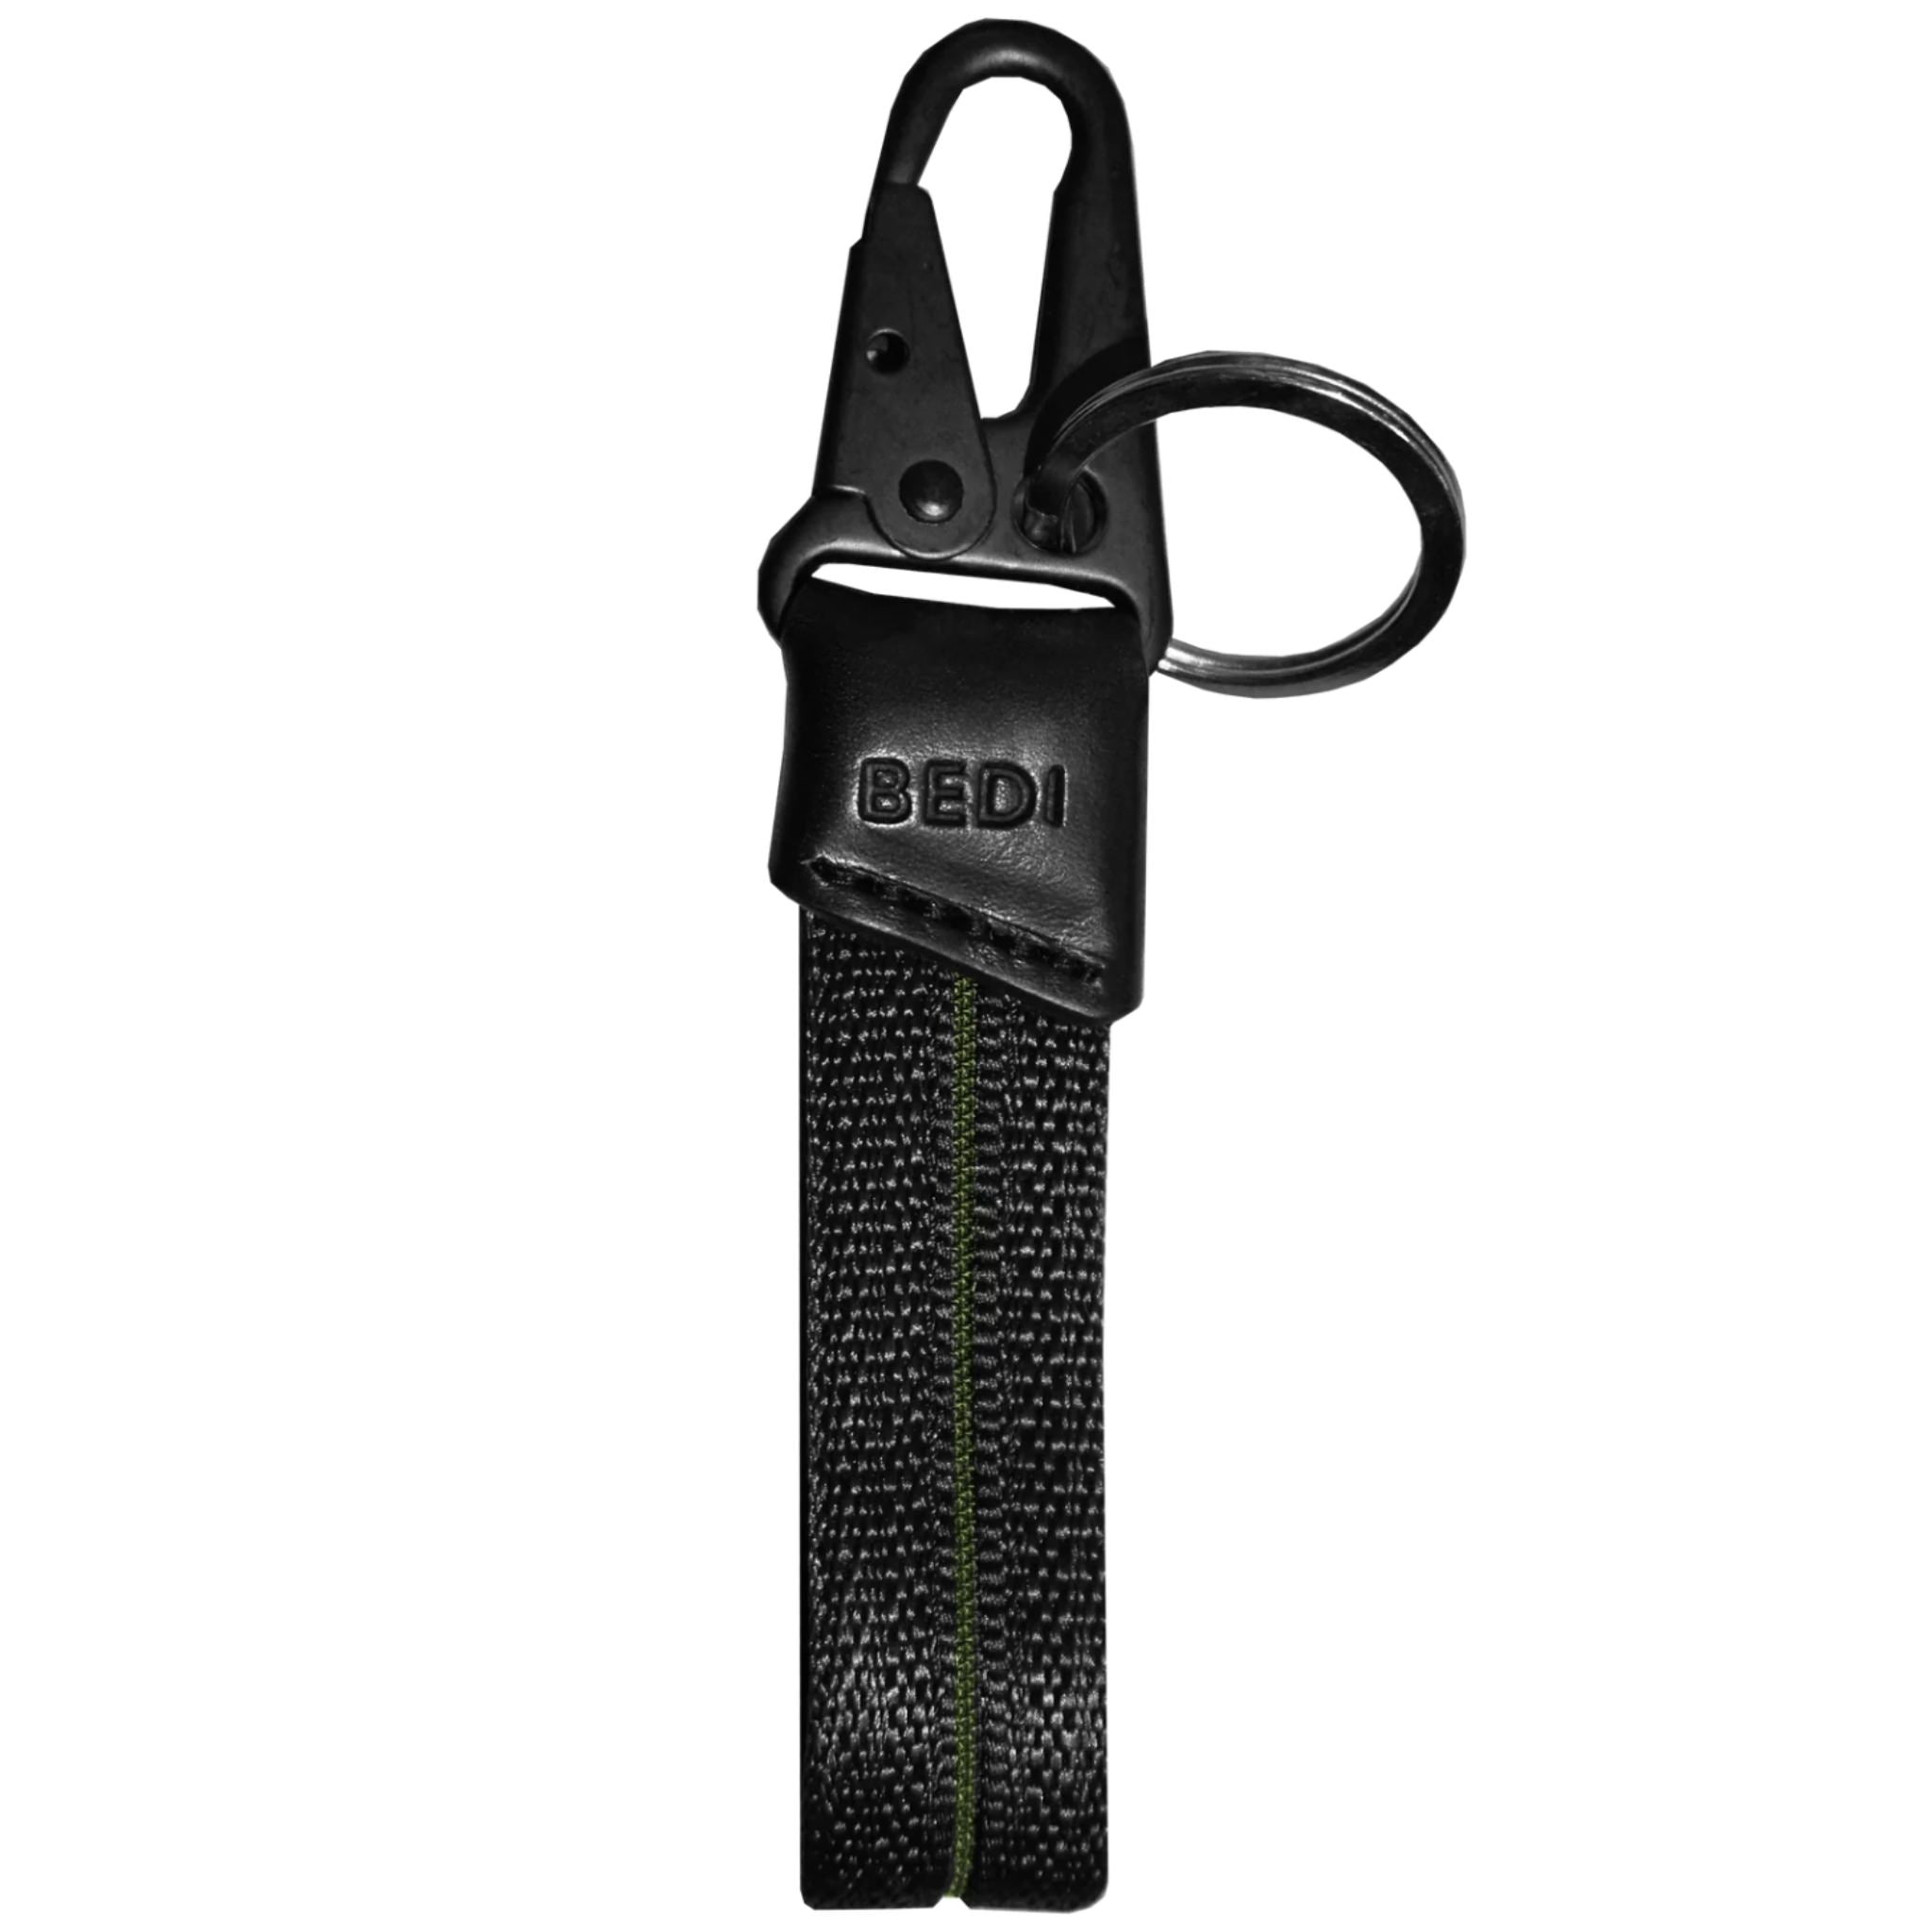 Black keychain made from seatbelt material, with thin line of inset green down the middle